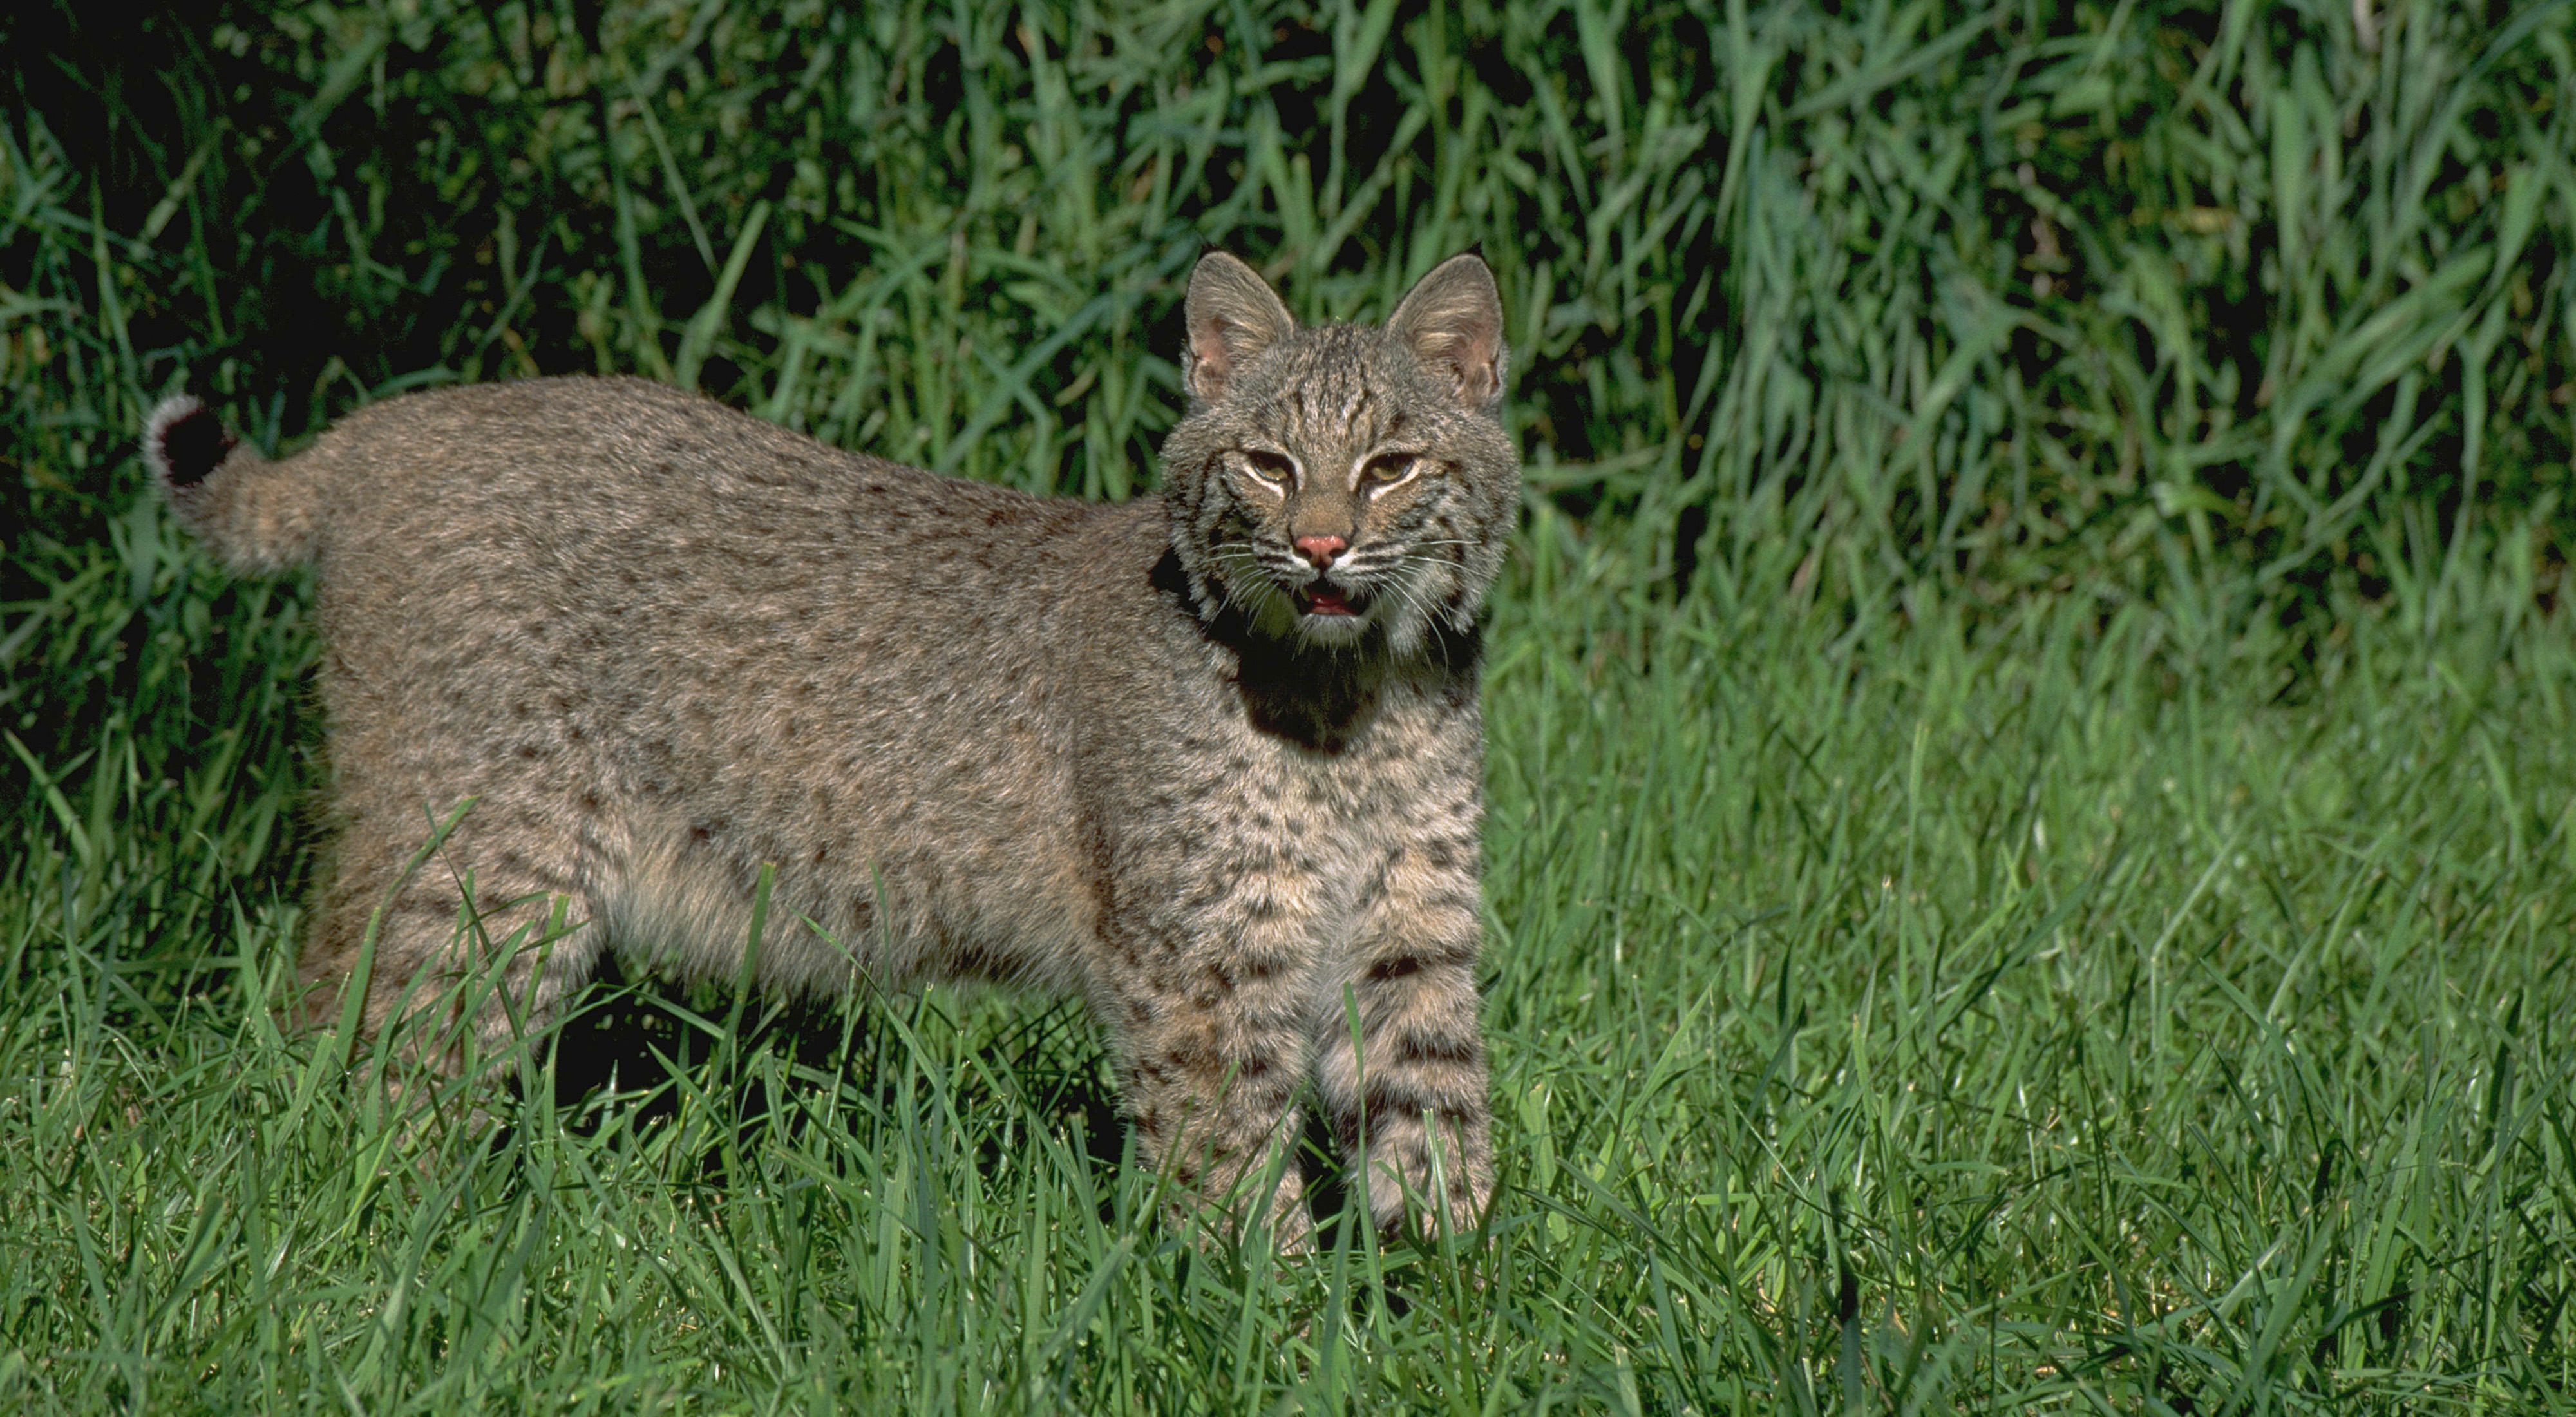 A bobcat stands in tall green grass and looks toward the camera.